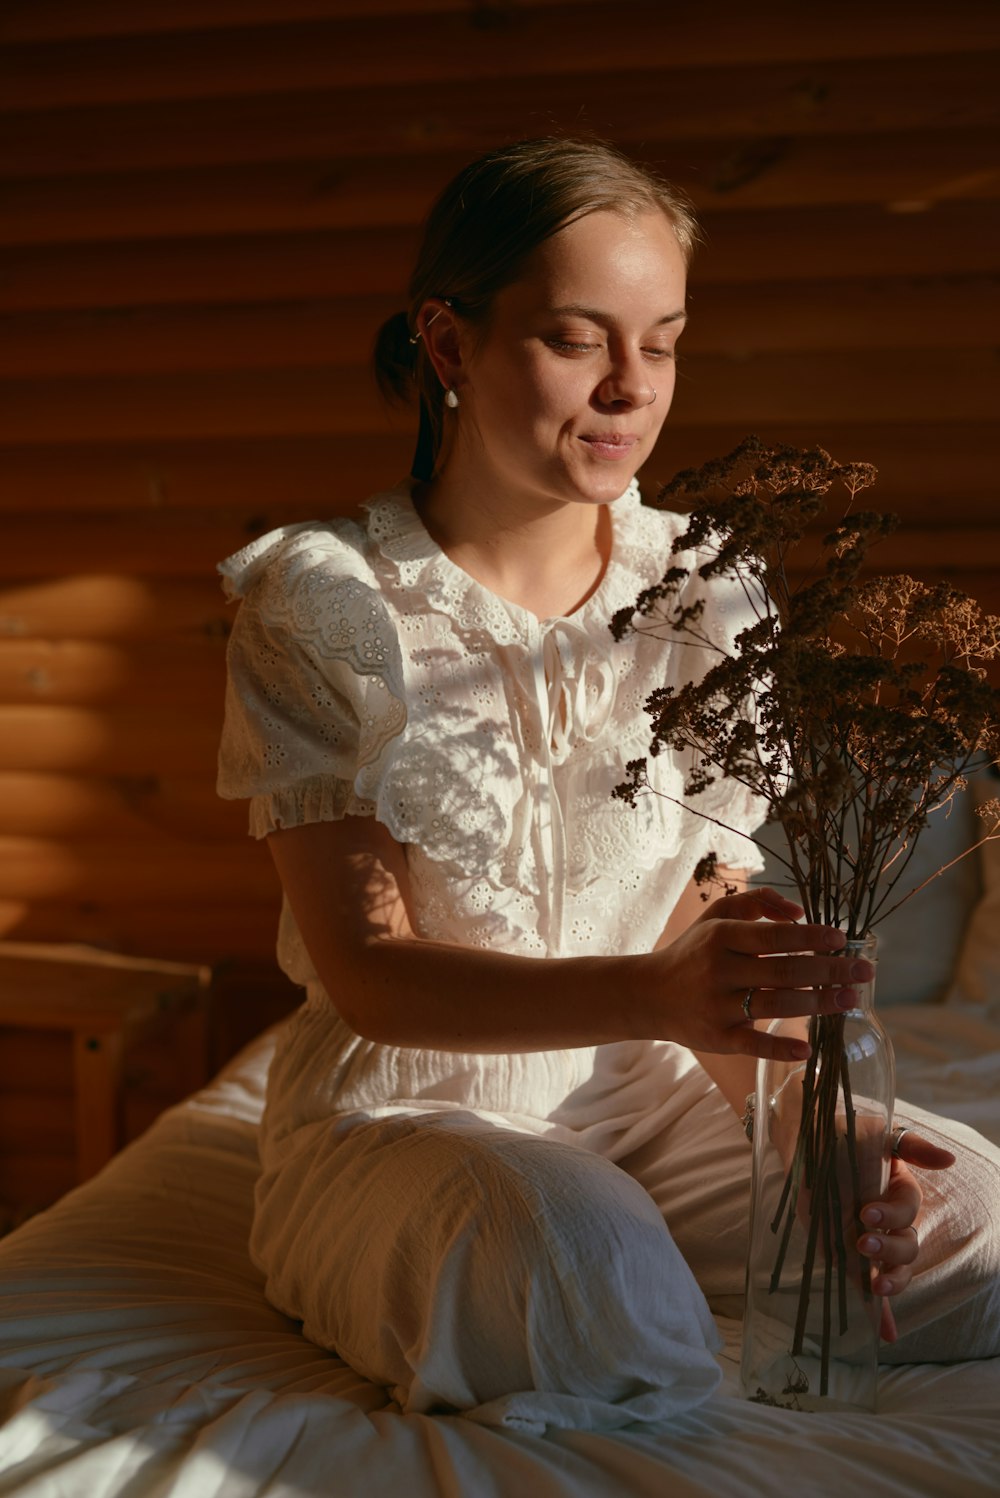 a woman sitting on a bed holding a bouquet of flowers